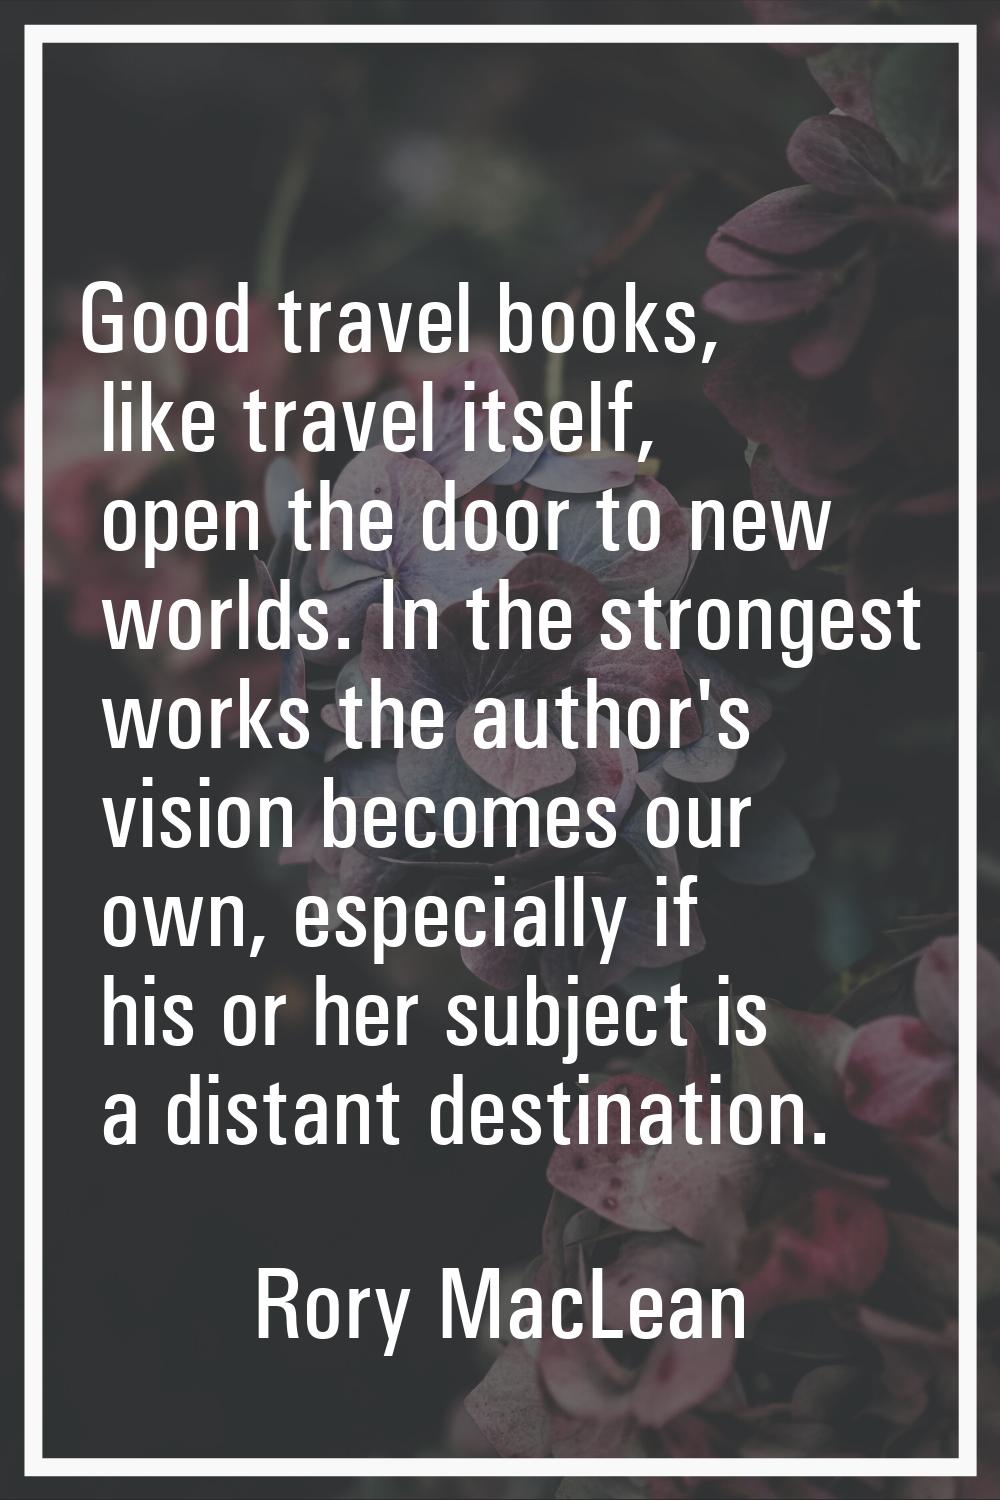 Good travel books, like travel itself, open the door to new worlds. In the strongest works the auth